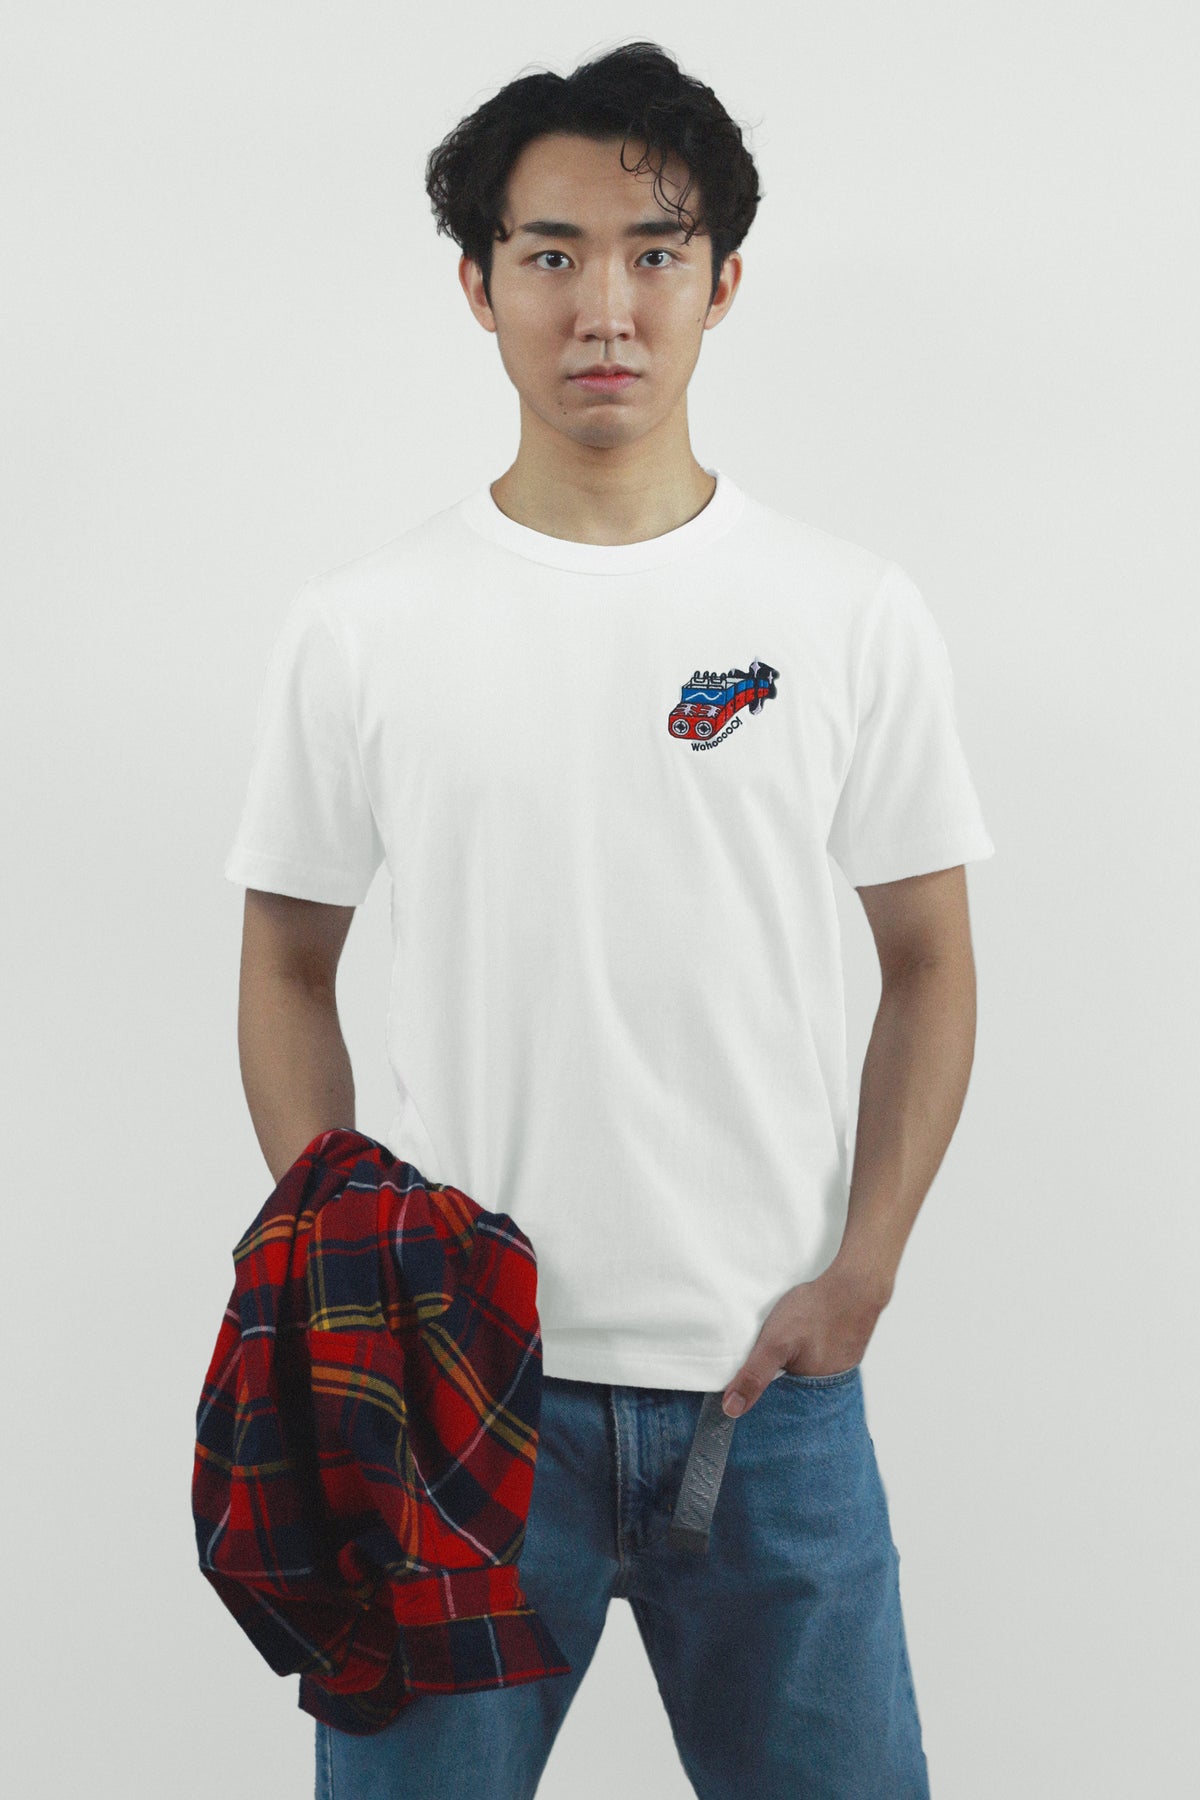 Graphic Embroidery Tee - "Roller Coaster" Embroidery Tee